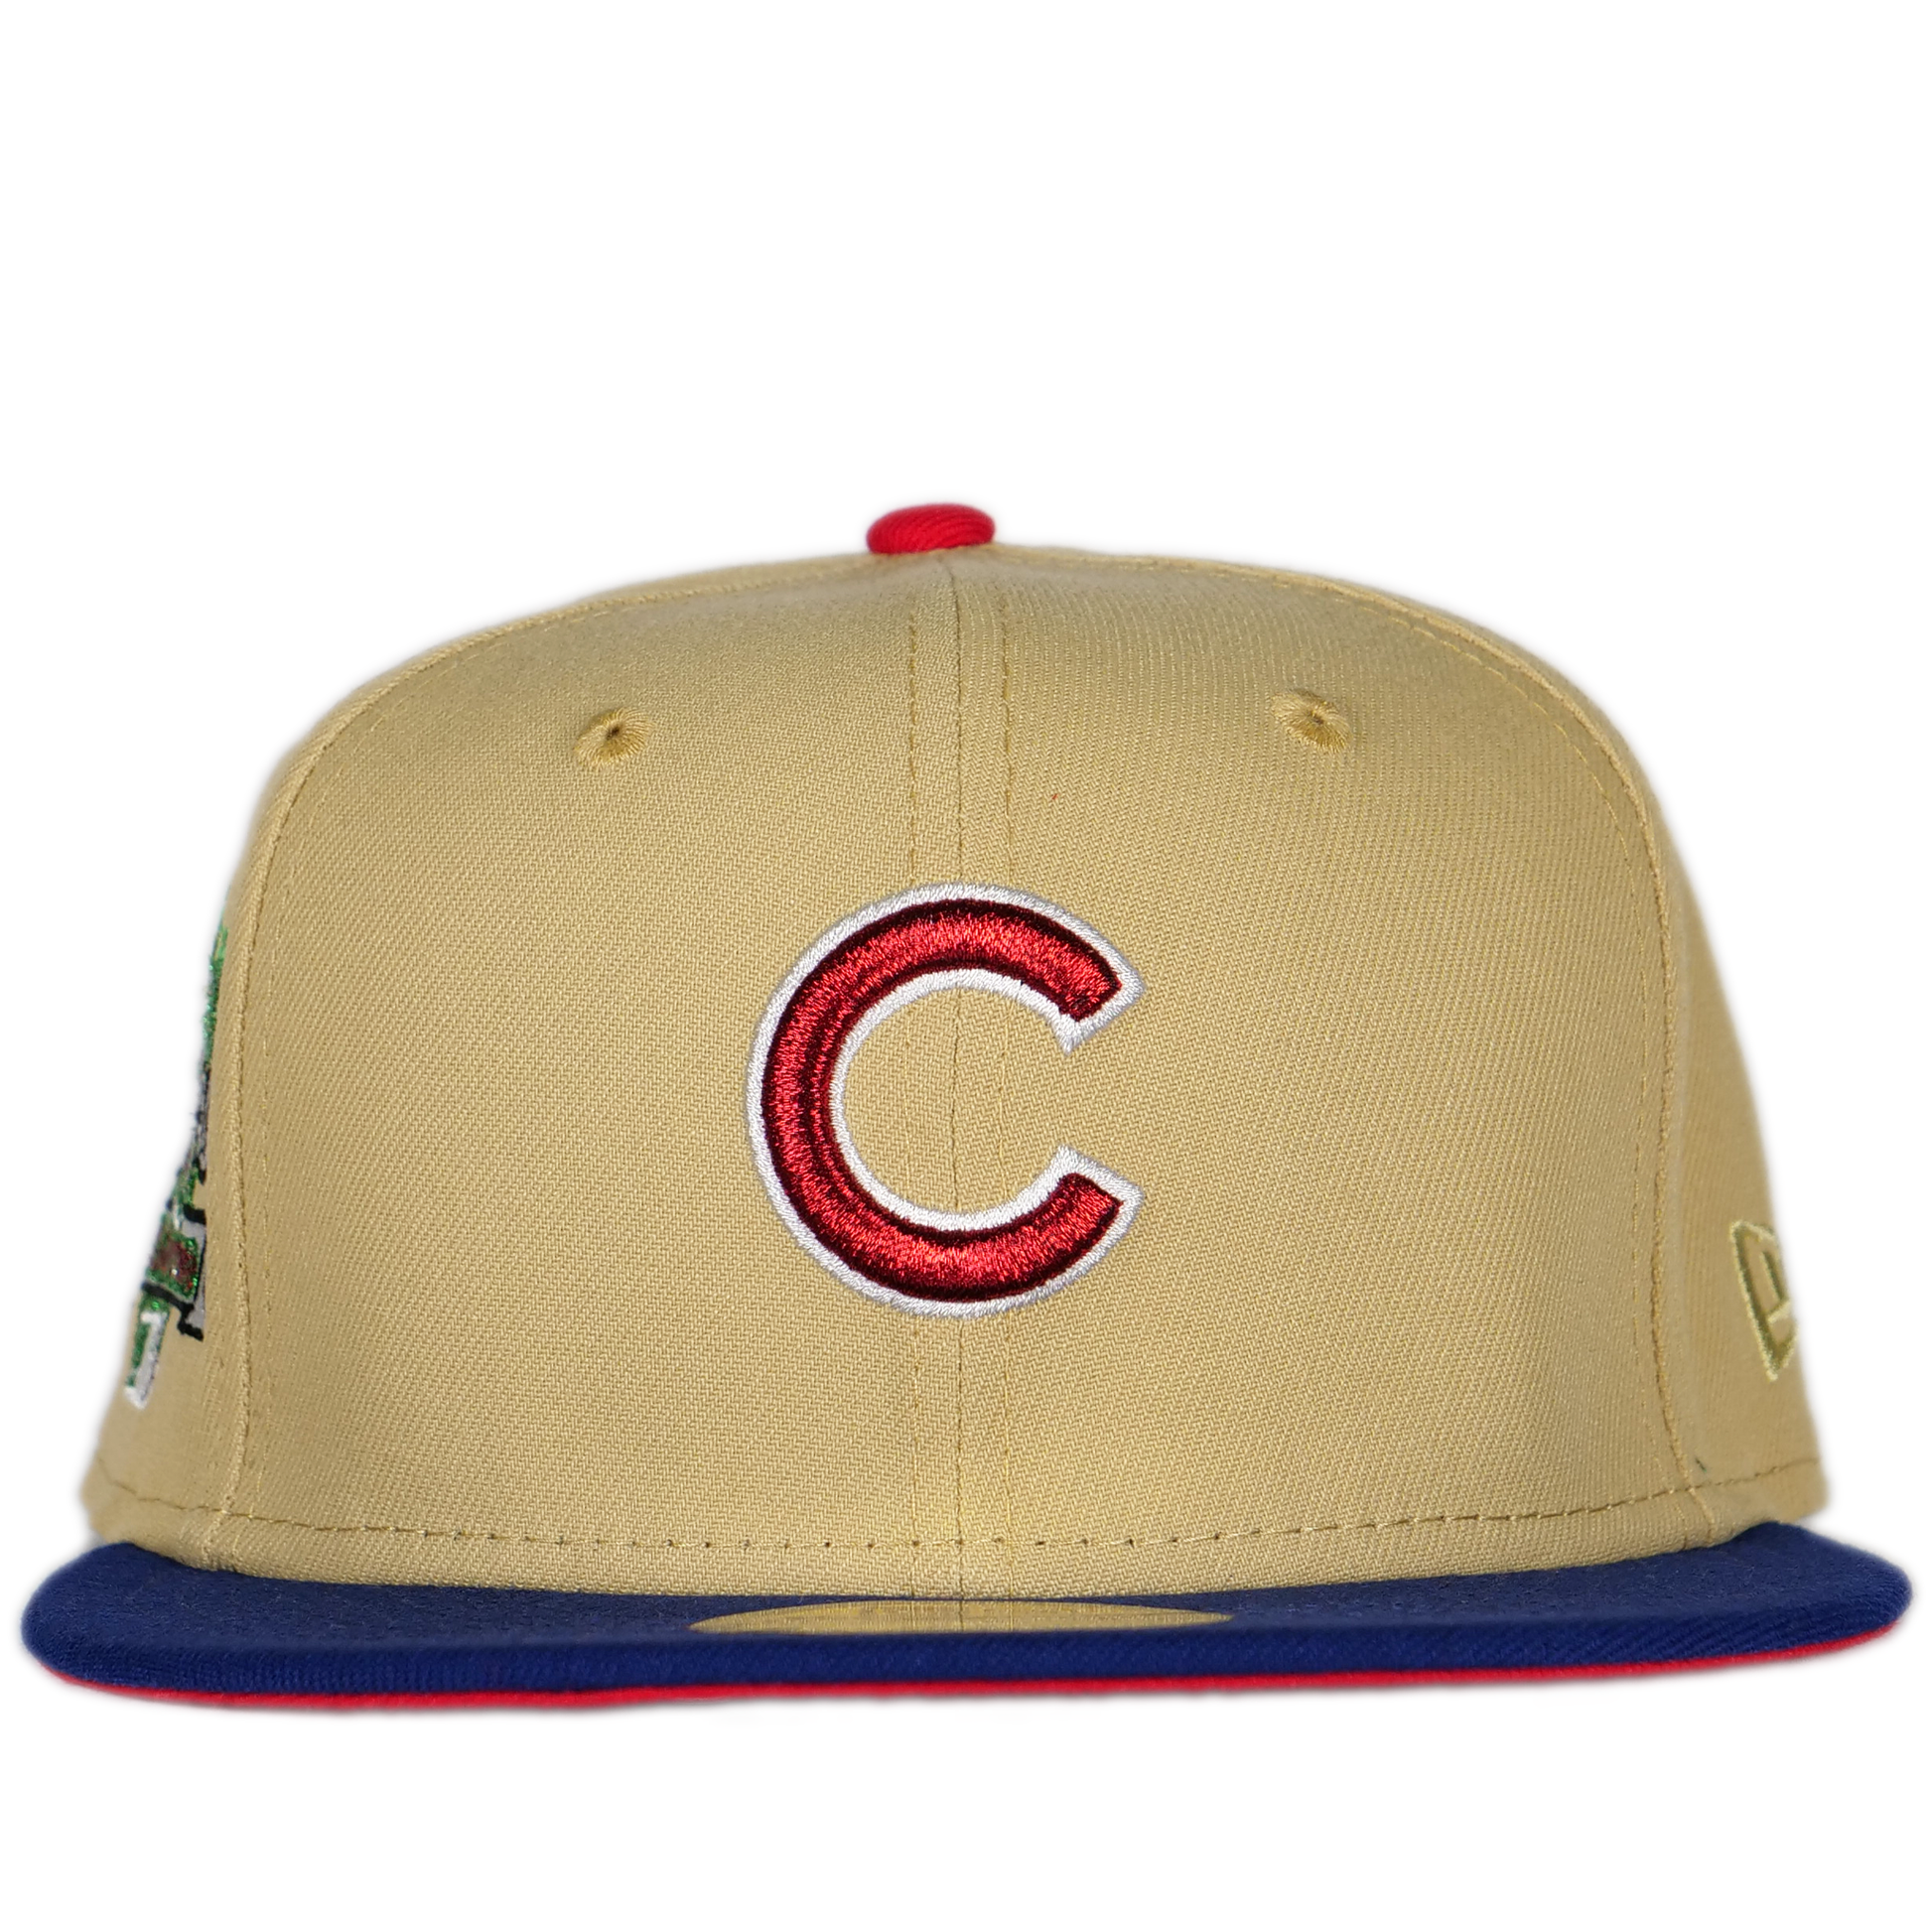 Cincinnati Reds Cream Collection fitted hat